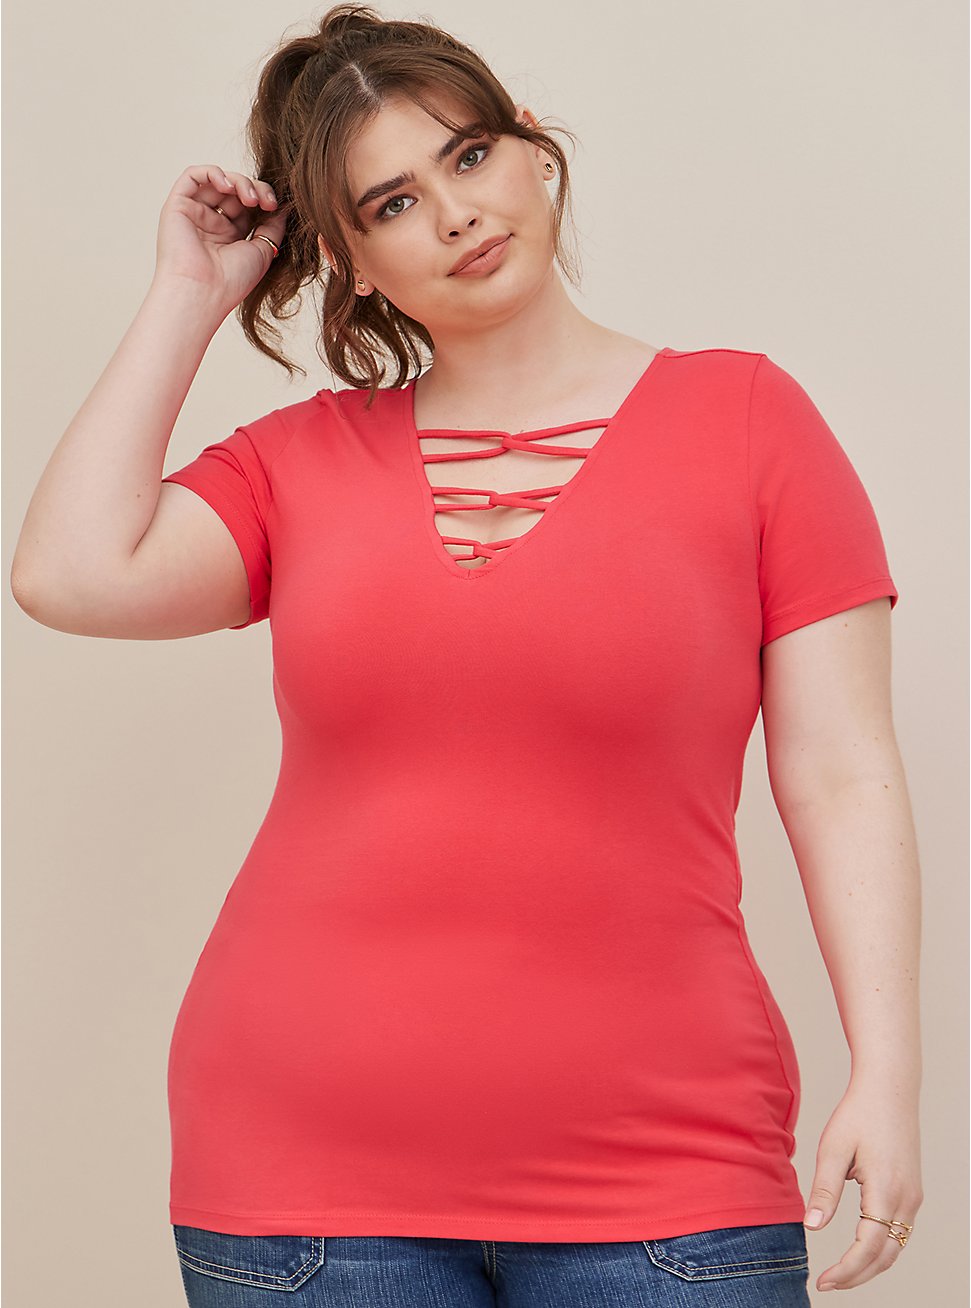 Plus Size Strappy Tee - Foxy Bright Berry, PINK, hi-res